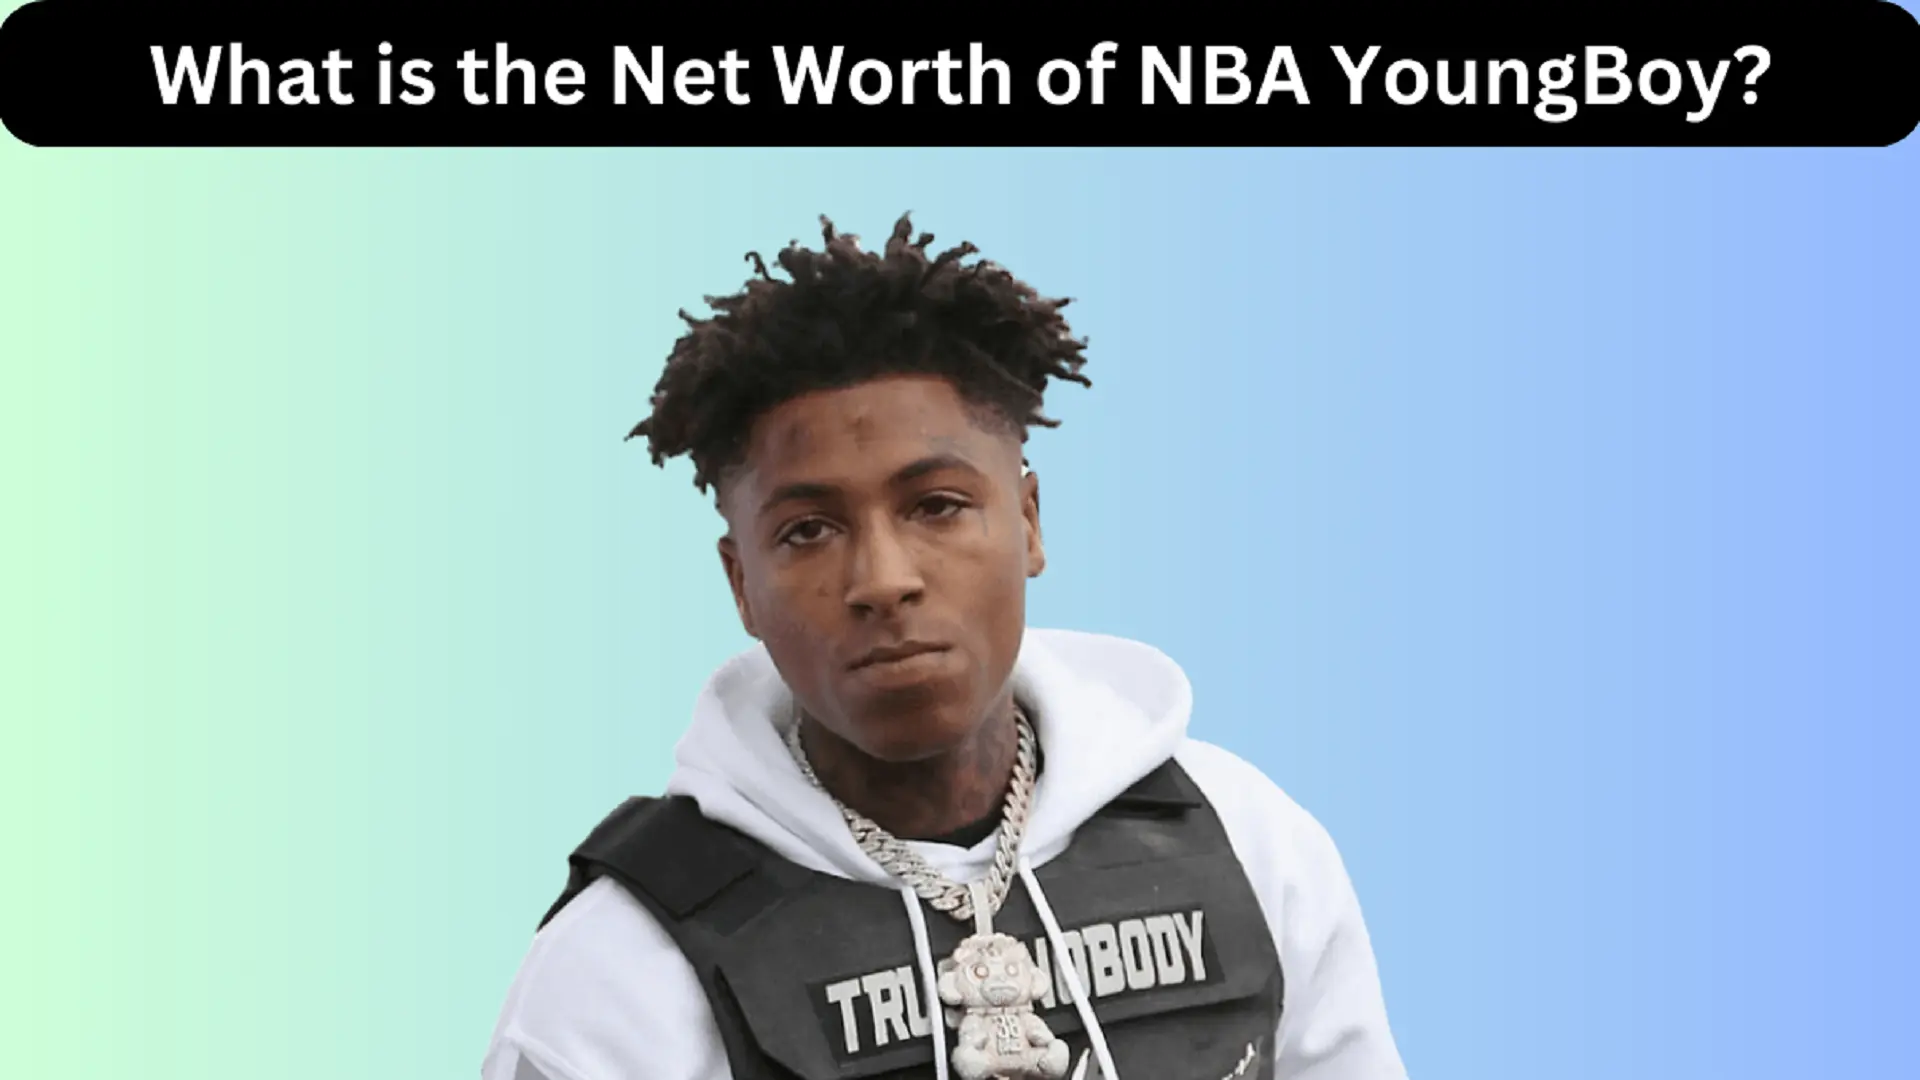 What is the Net Worth of NBA YoungBoy